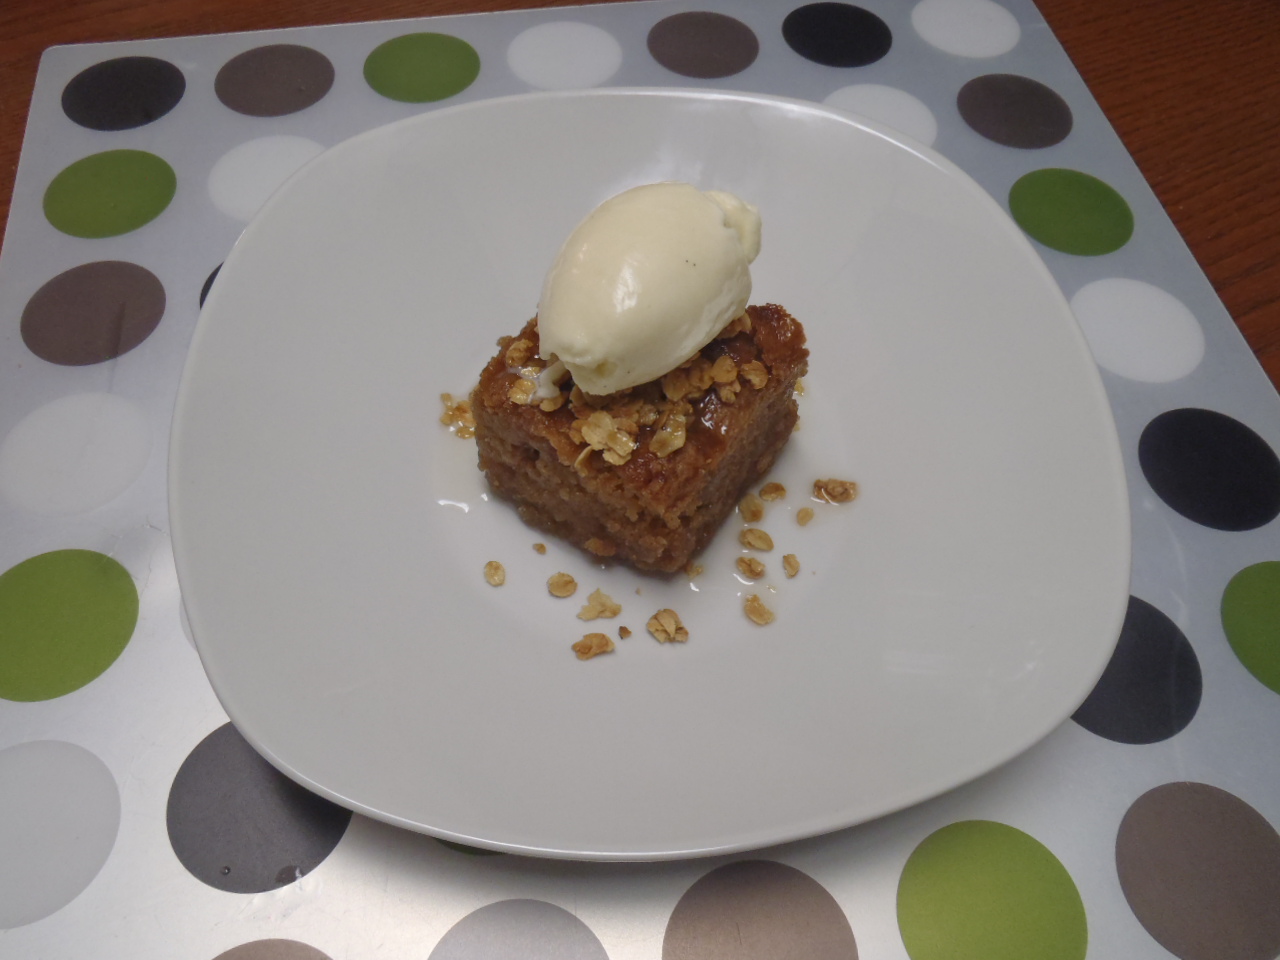 Oatcake soaked in maple syrup, with honey ice cream